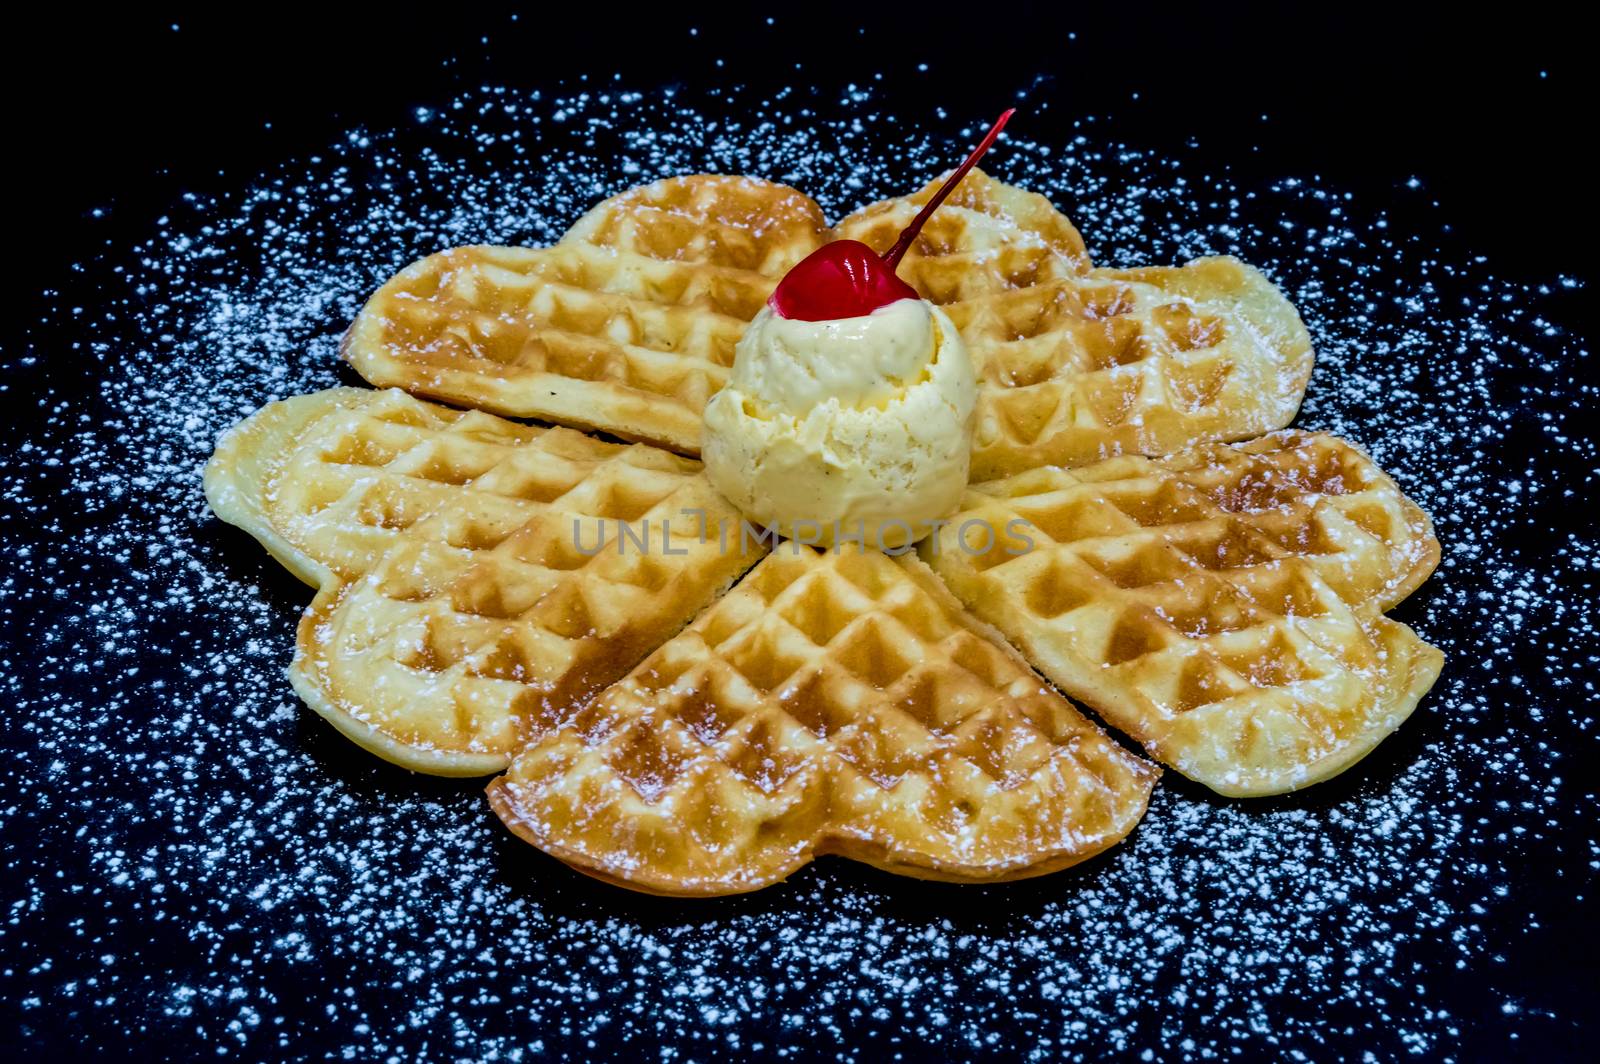 Homemade waffles with powdered sugar, a scoop of vanilla ice cre by Philou1000